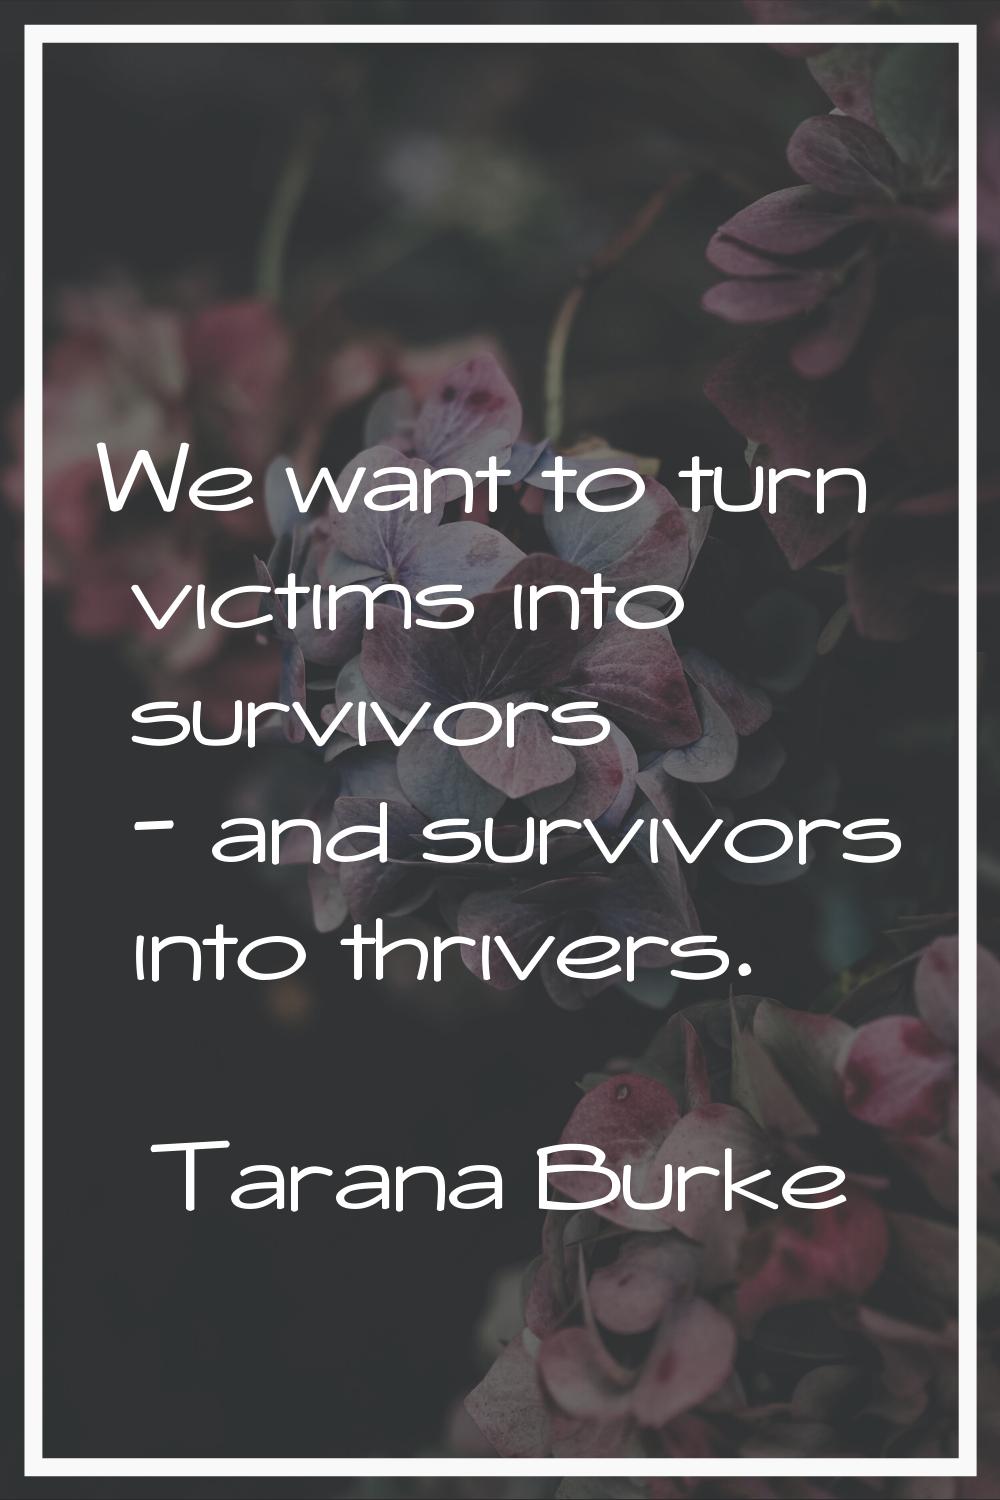 We want to turn victims into survivors - and survivors into thrivers.